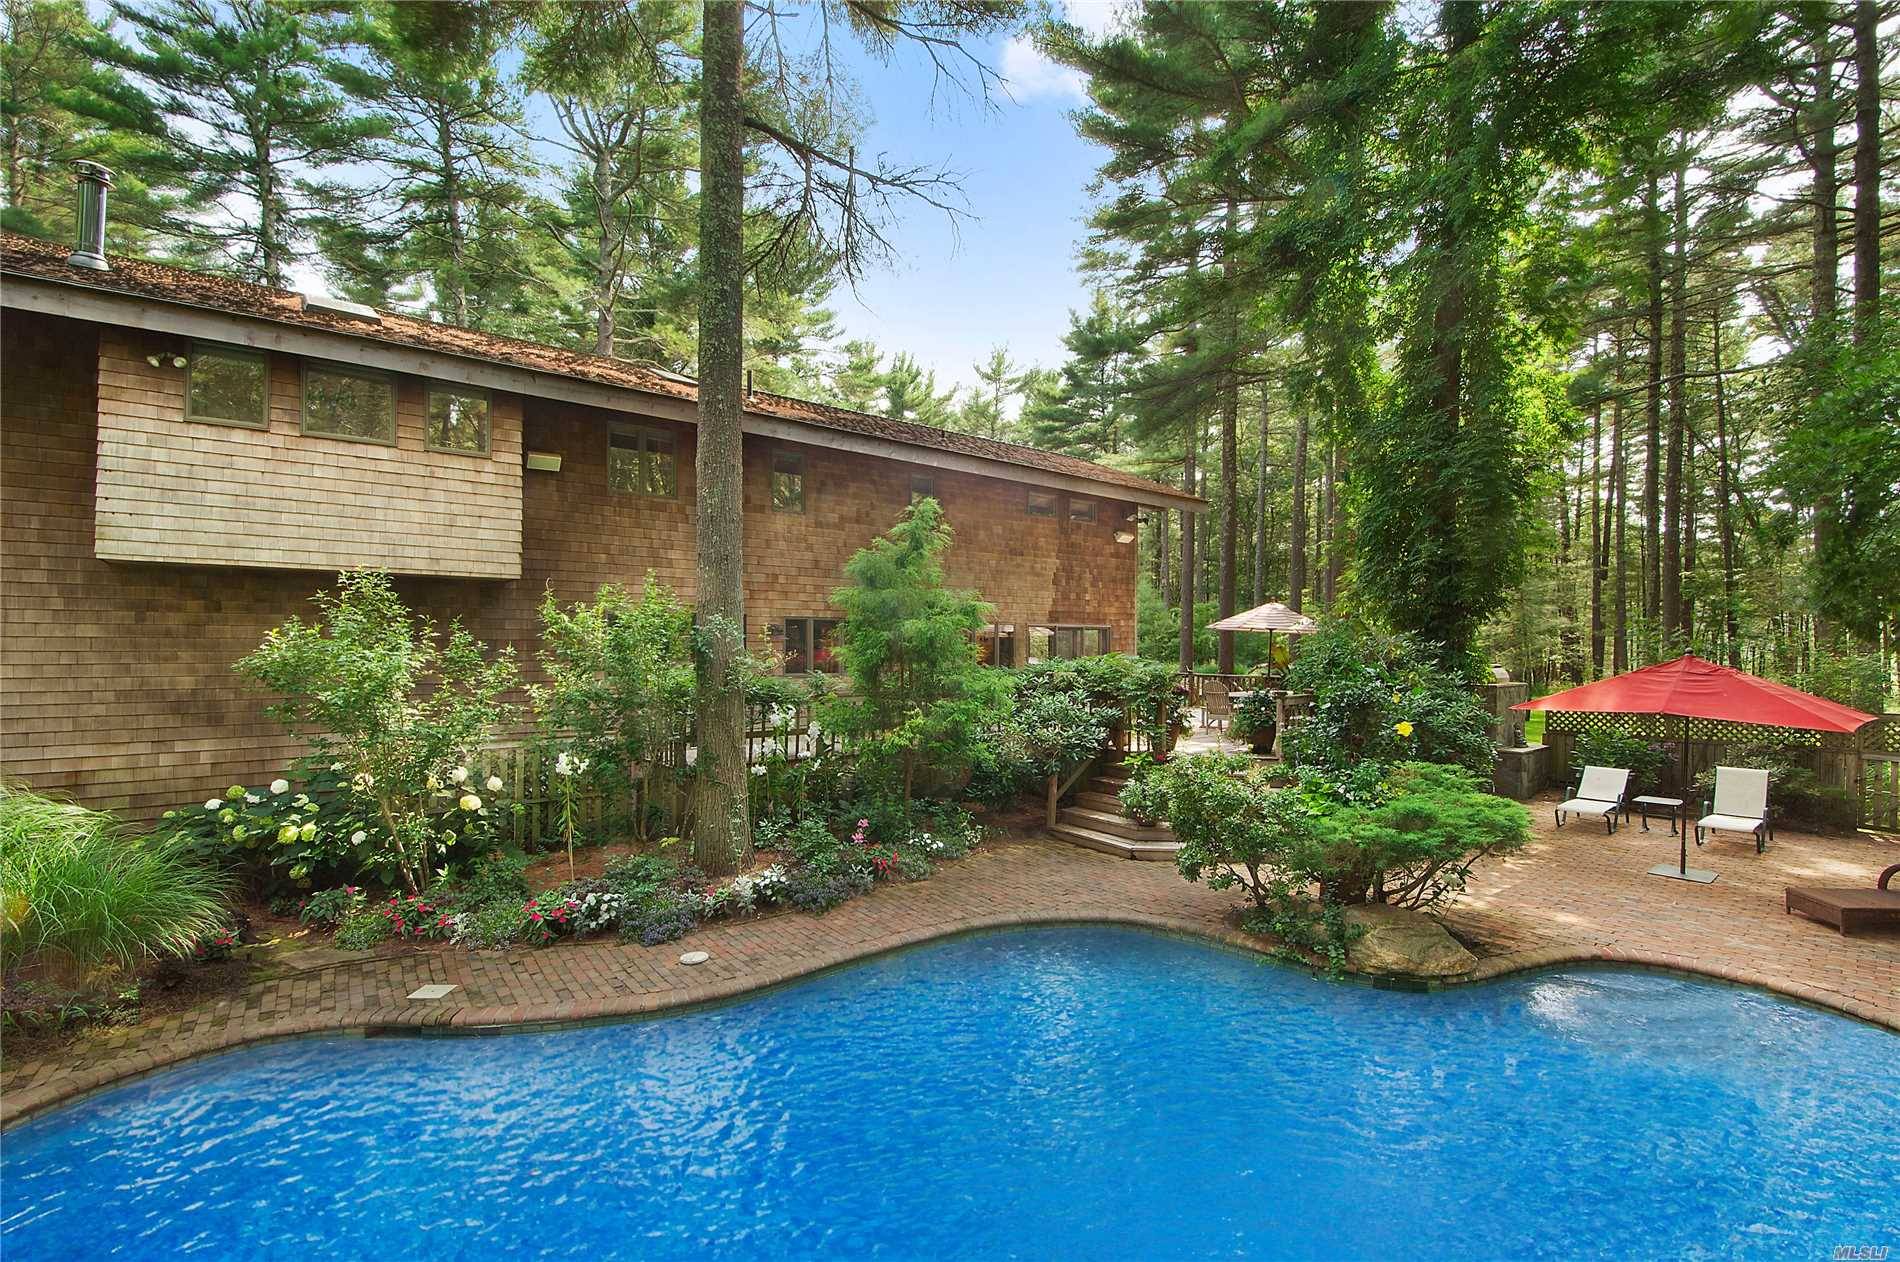 Located just outside East Hampton on 2 acres is this custom post and beam house.